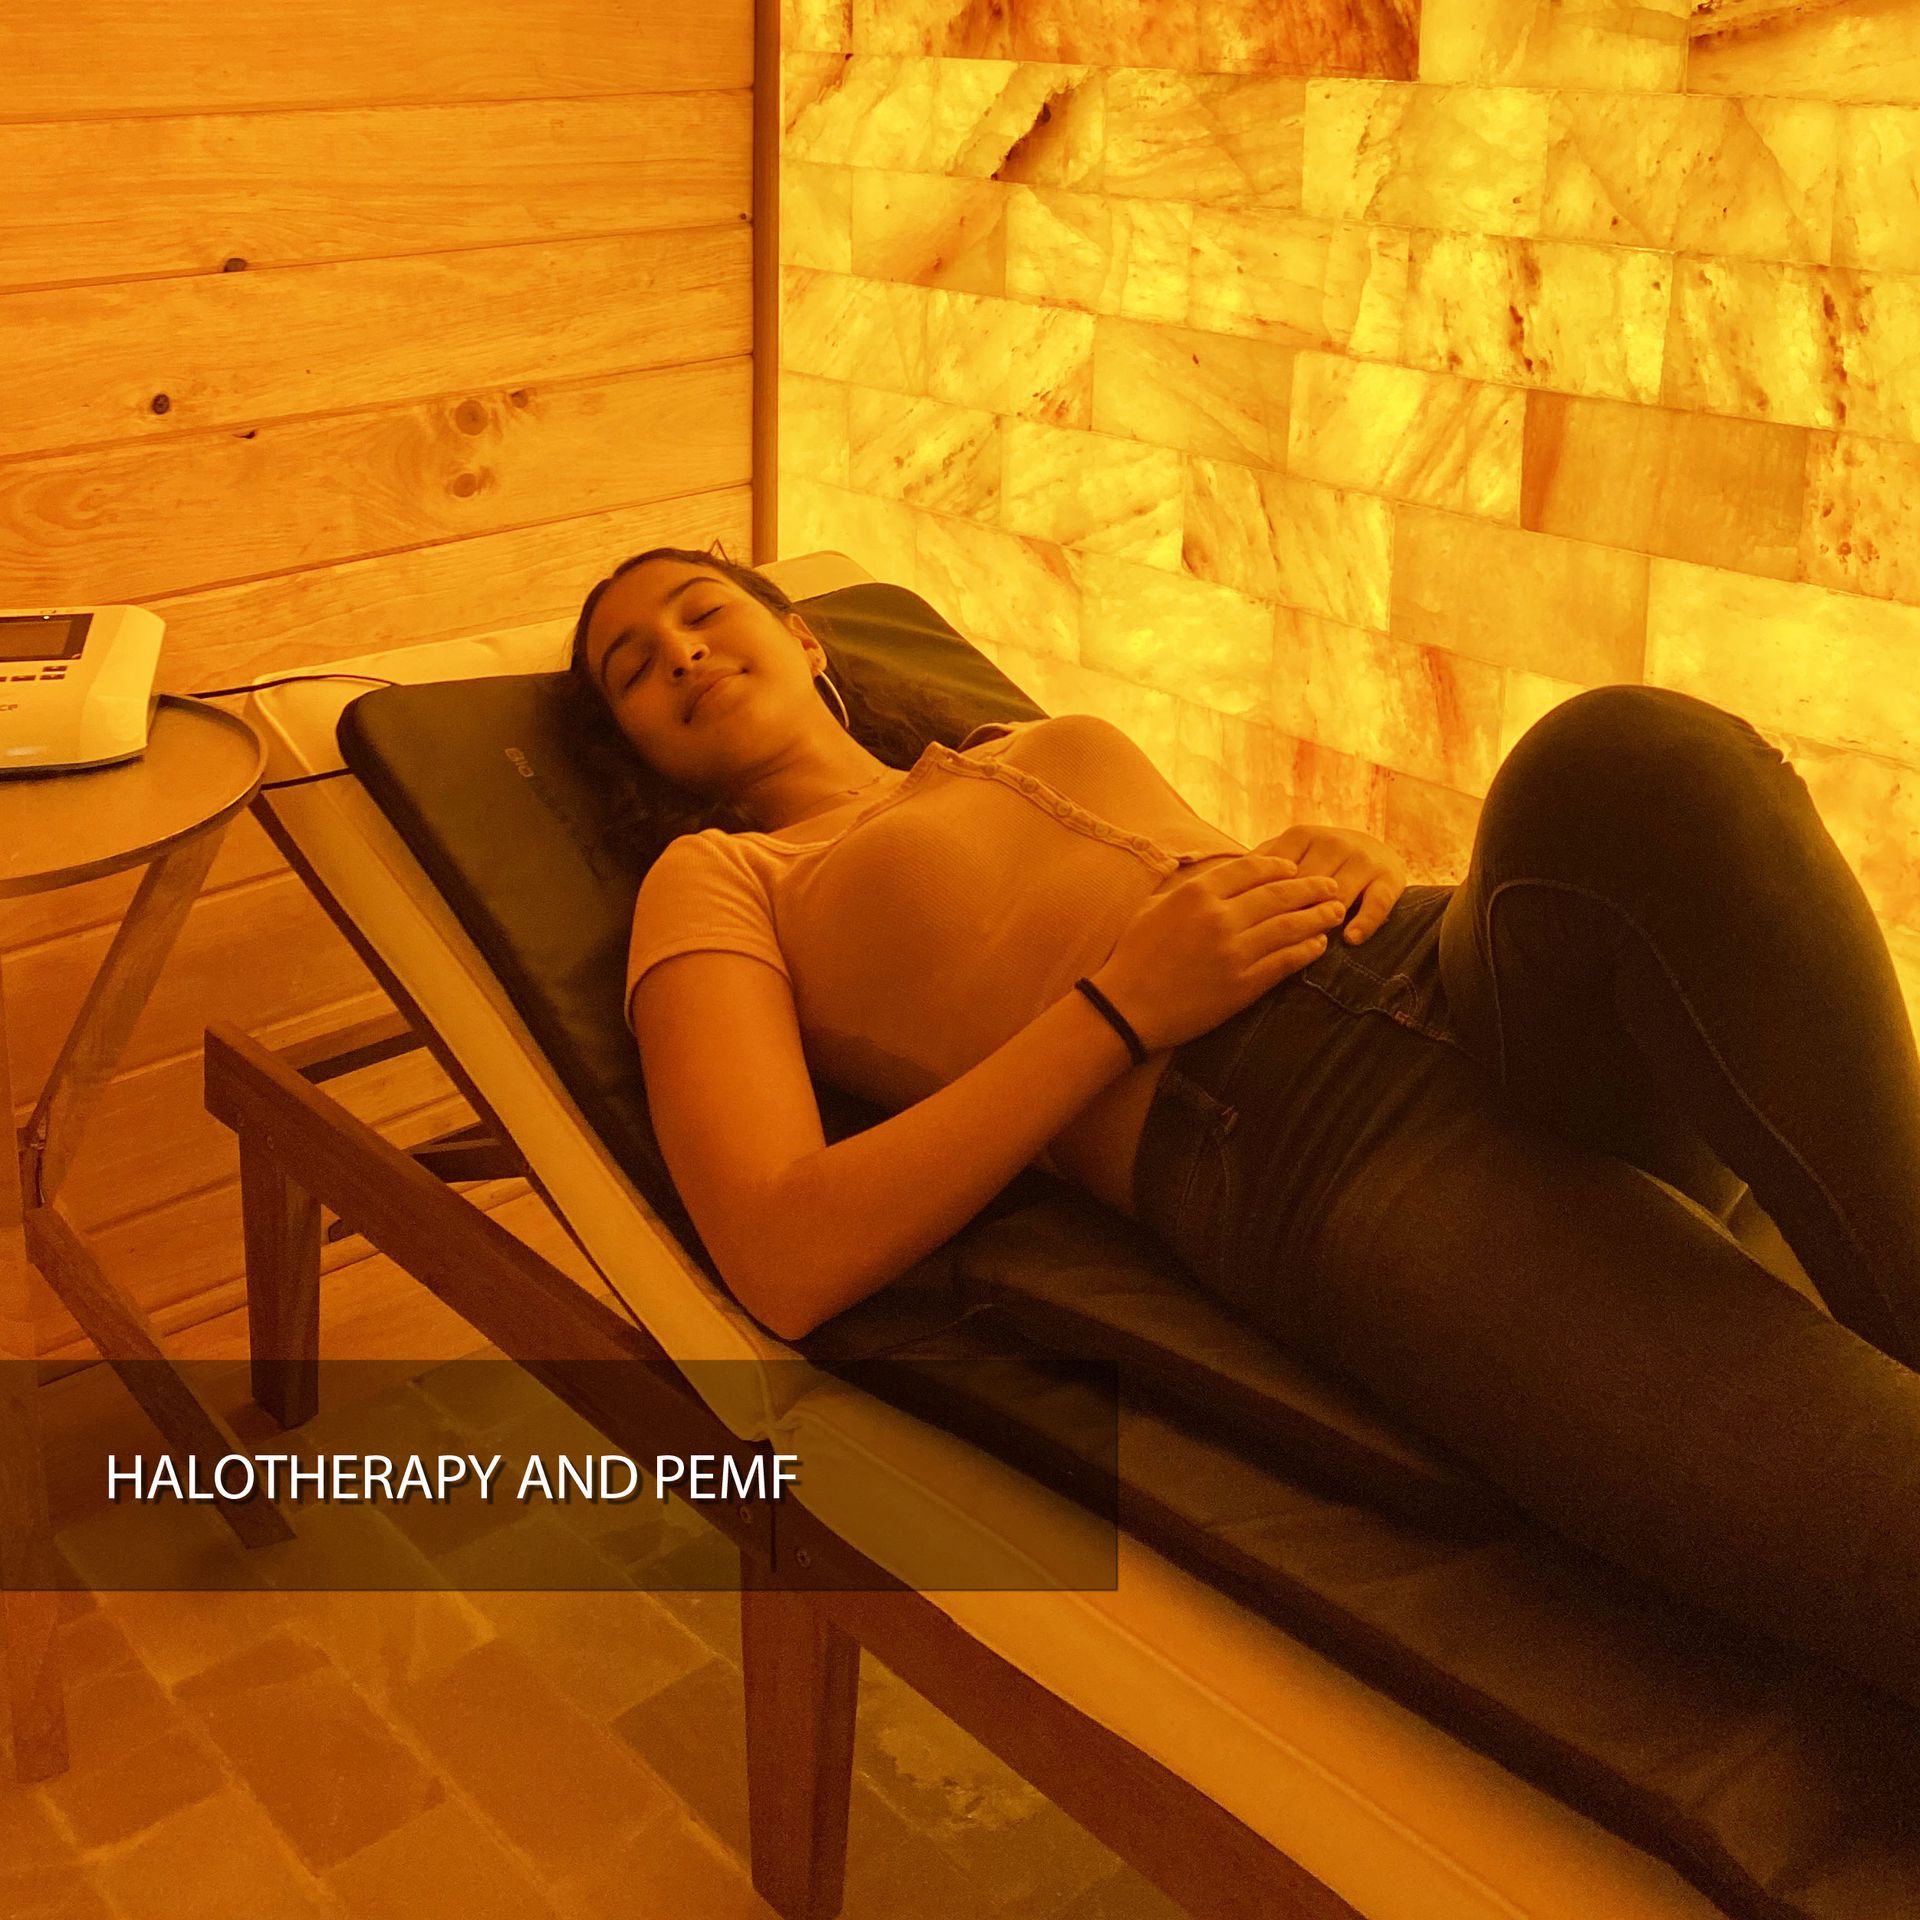 Halotherapy and PEMF at Chill Space NYC